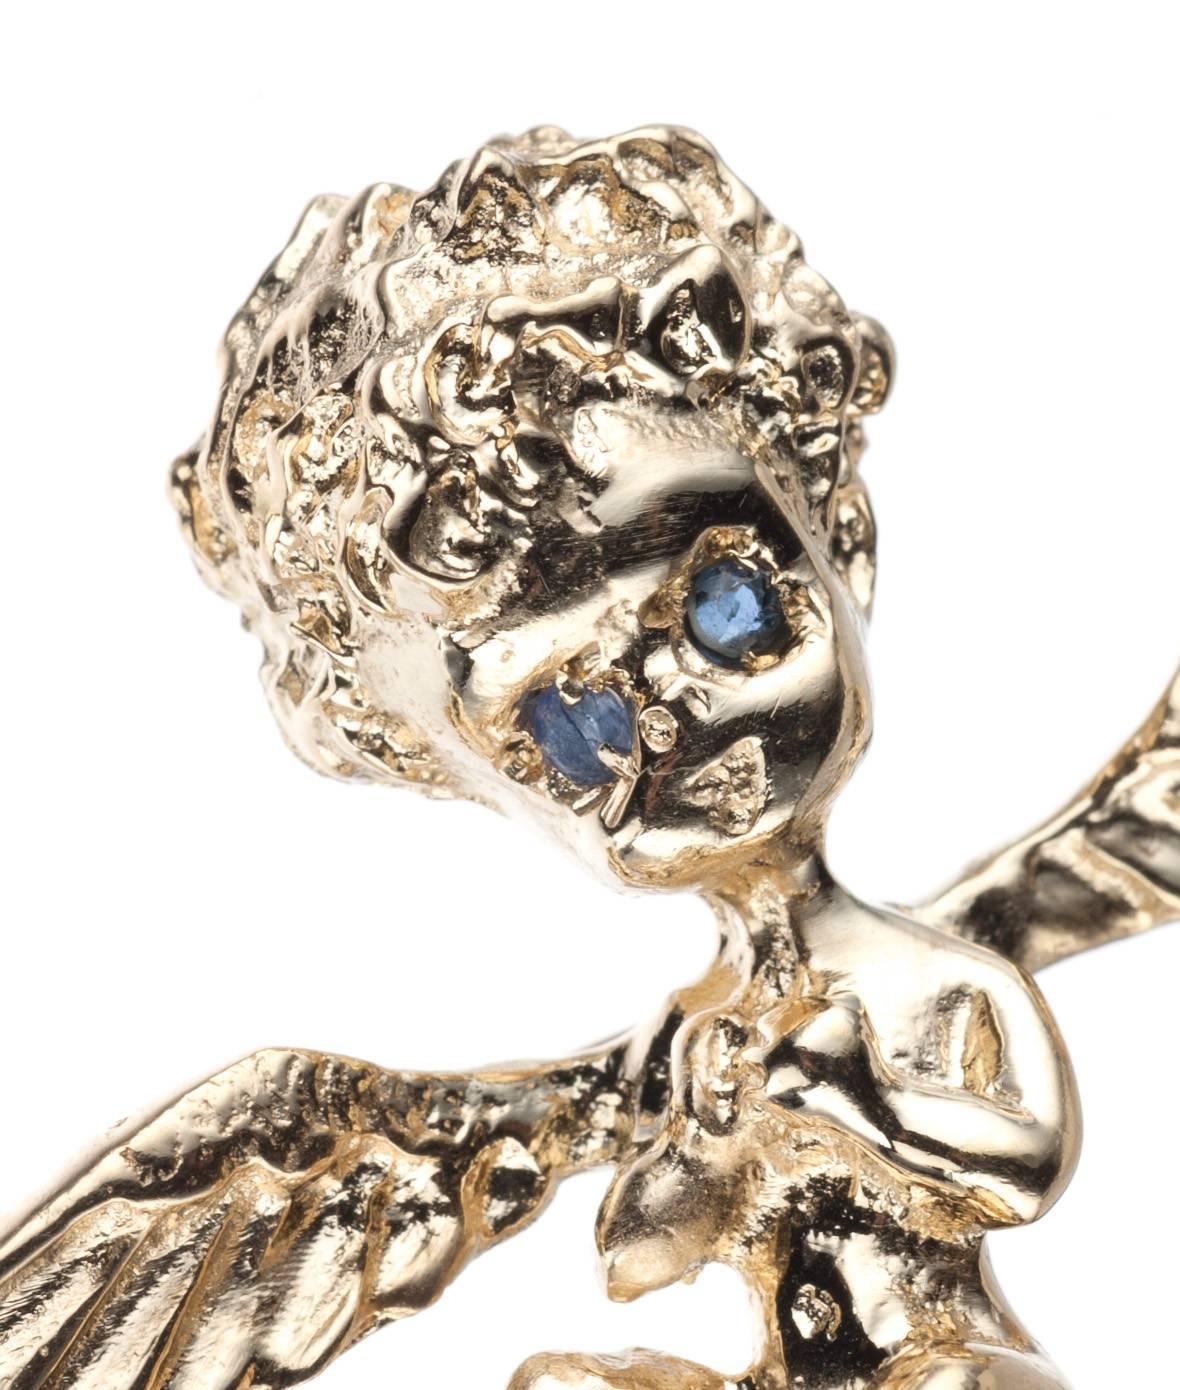 Made in the style of Ruser, a 14-karat yellow gold cherub brooch. The angel rest atop a cloud-shaped baroque cultured pearl, approx. 0.33” wide, and has two round blue sapphires for eyes. Fastens with pin stem and catch. Measures approx. 1.5” long